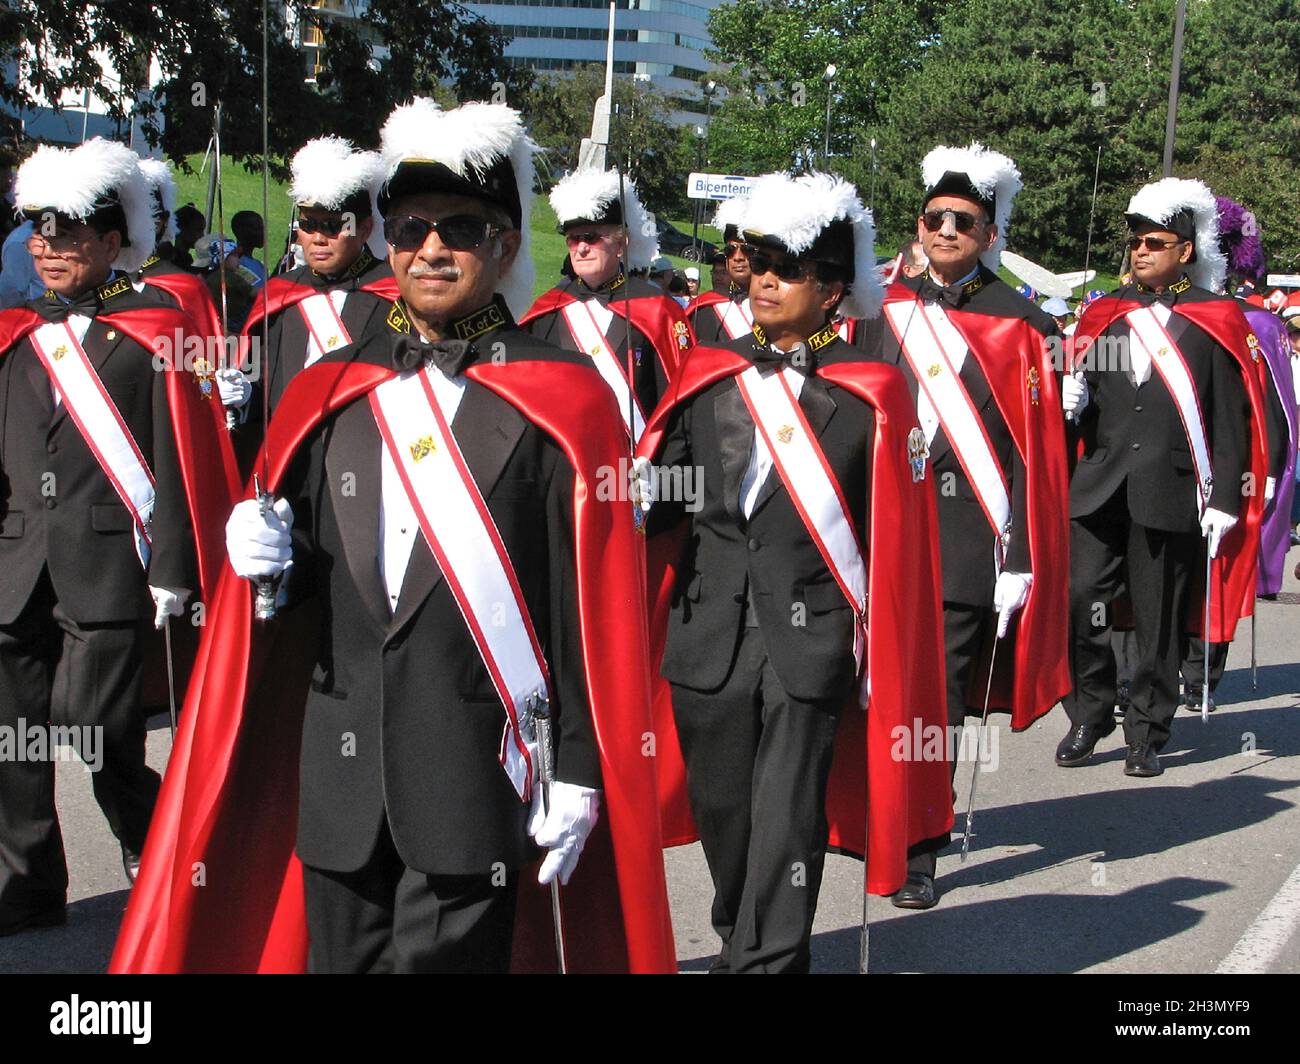 Toronto, Ontario / Canada - July 01, 2008: Knights of Columbus marching in the Canada Day parade Stock Photo